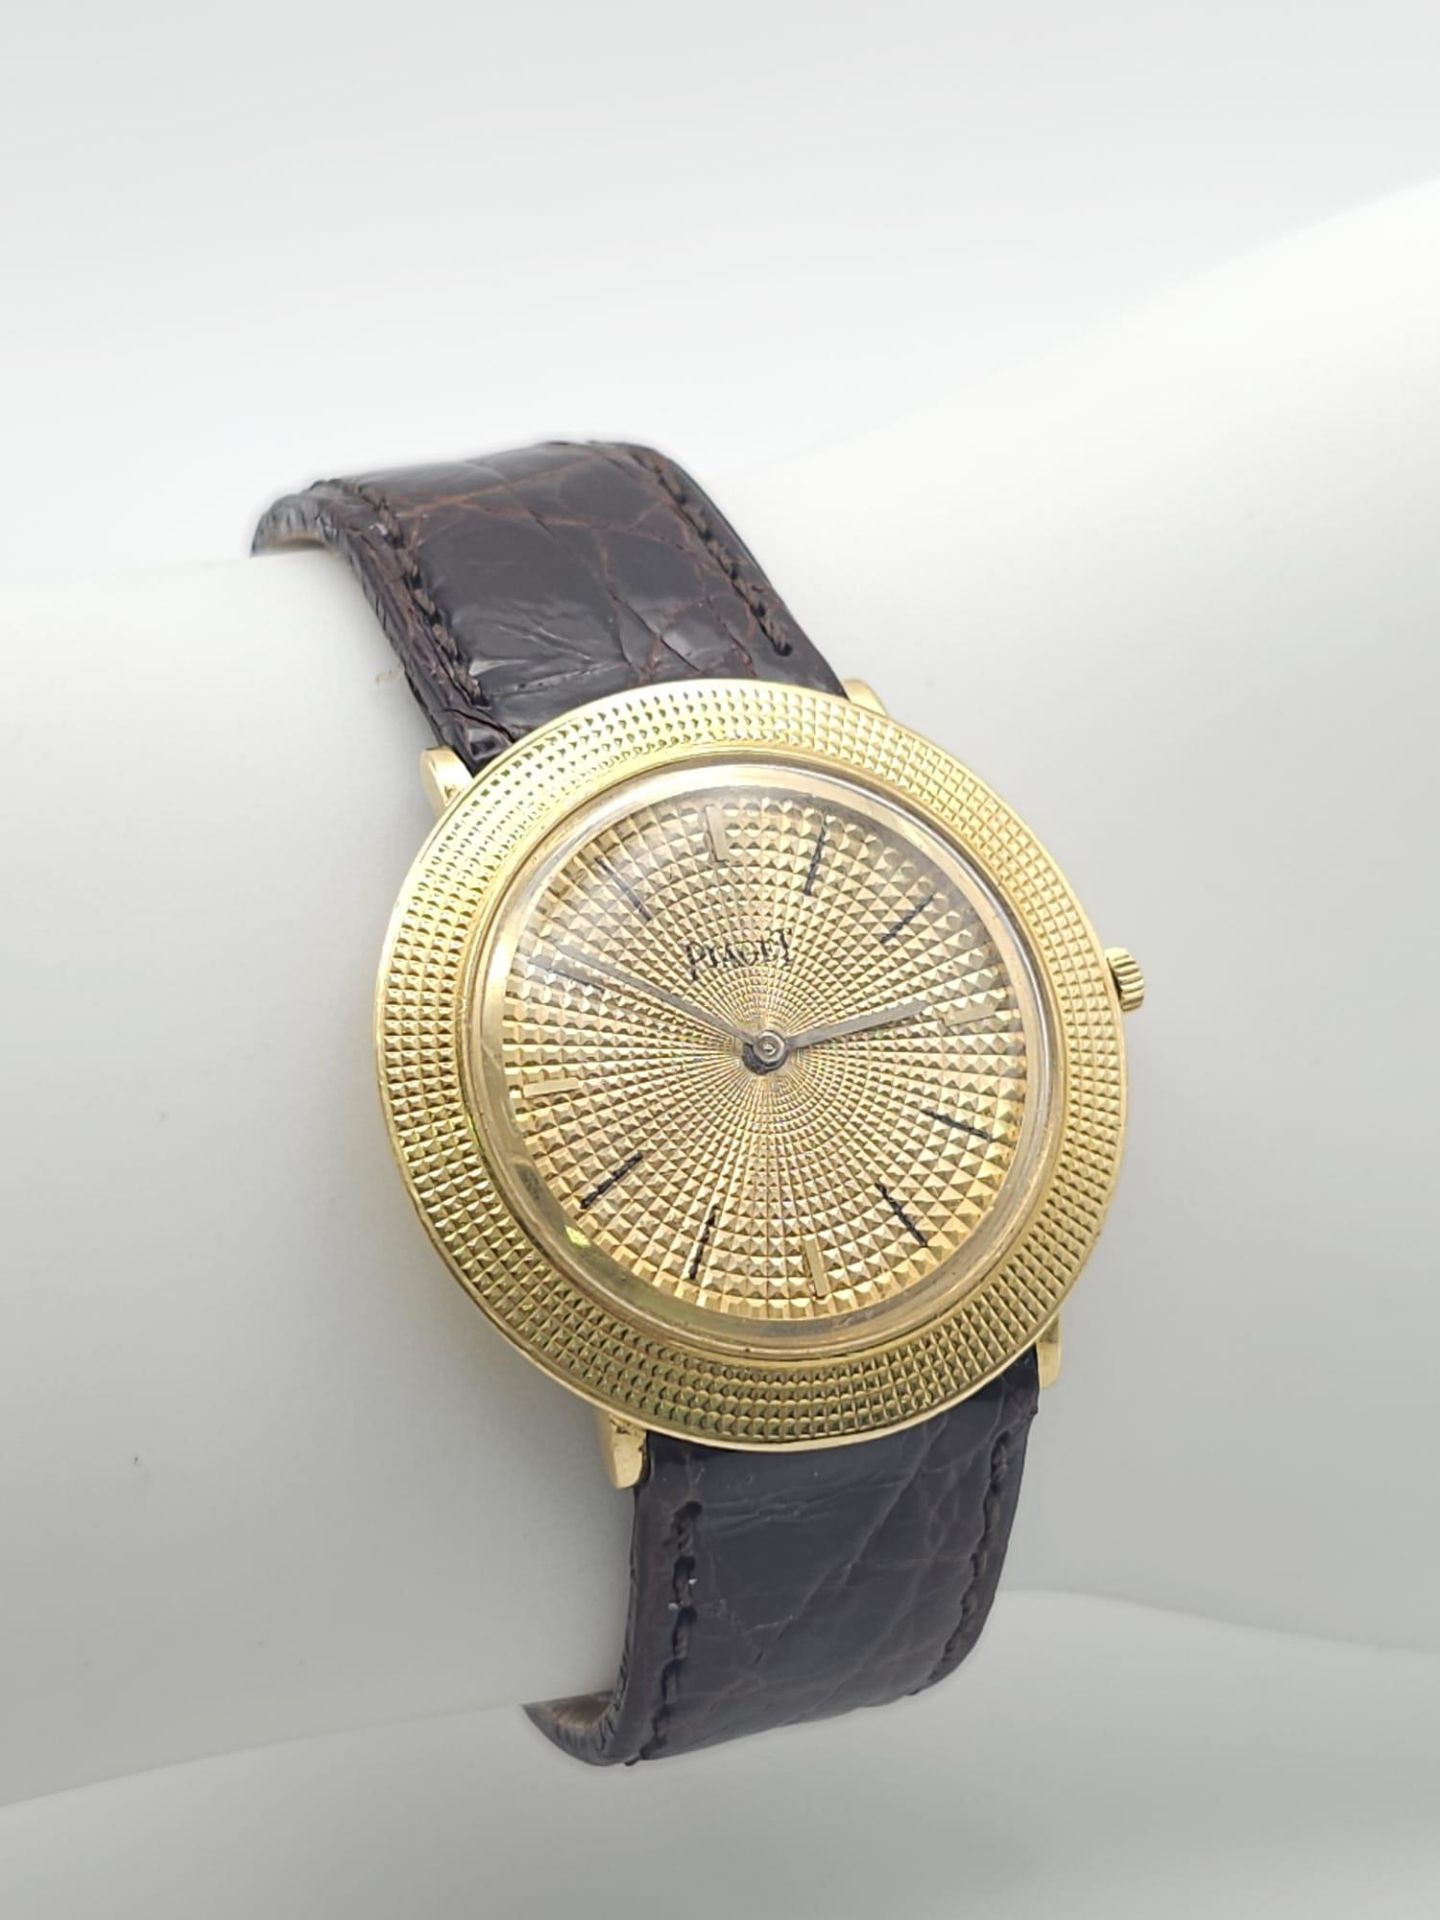 A Vintage 18K Gold Piaget Gents Watch with Hypnotic Dial. Brown crocodile strap. 18k gold case - - Image 25 of 25